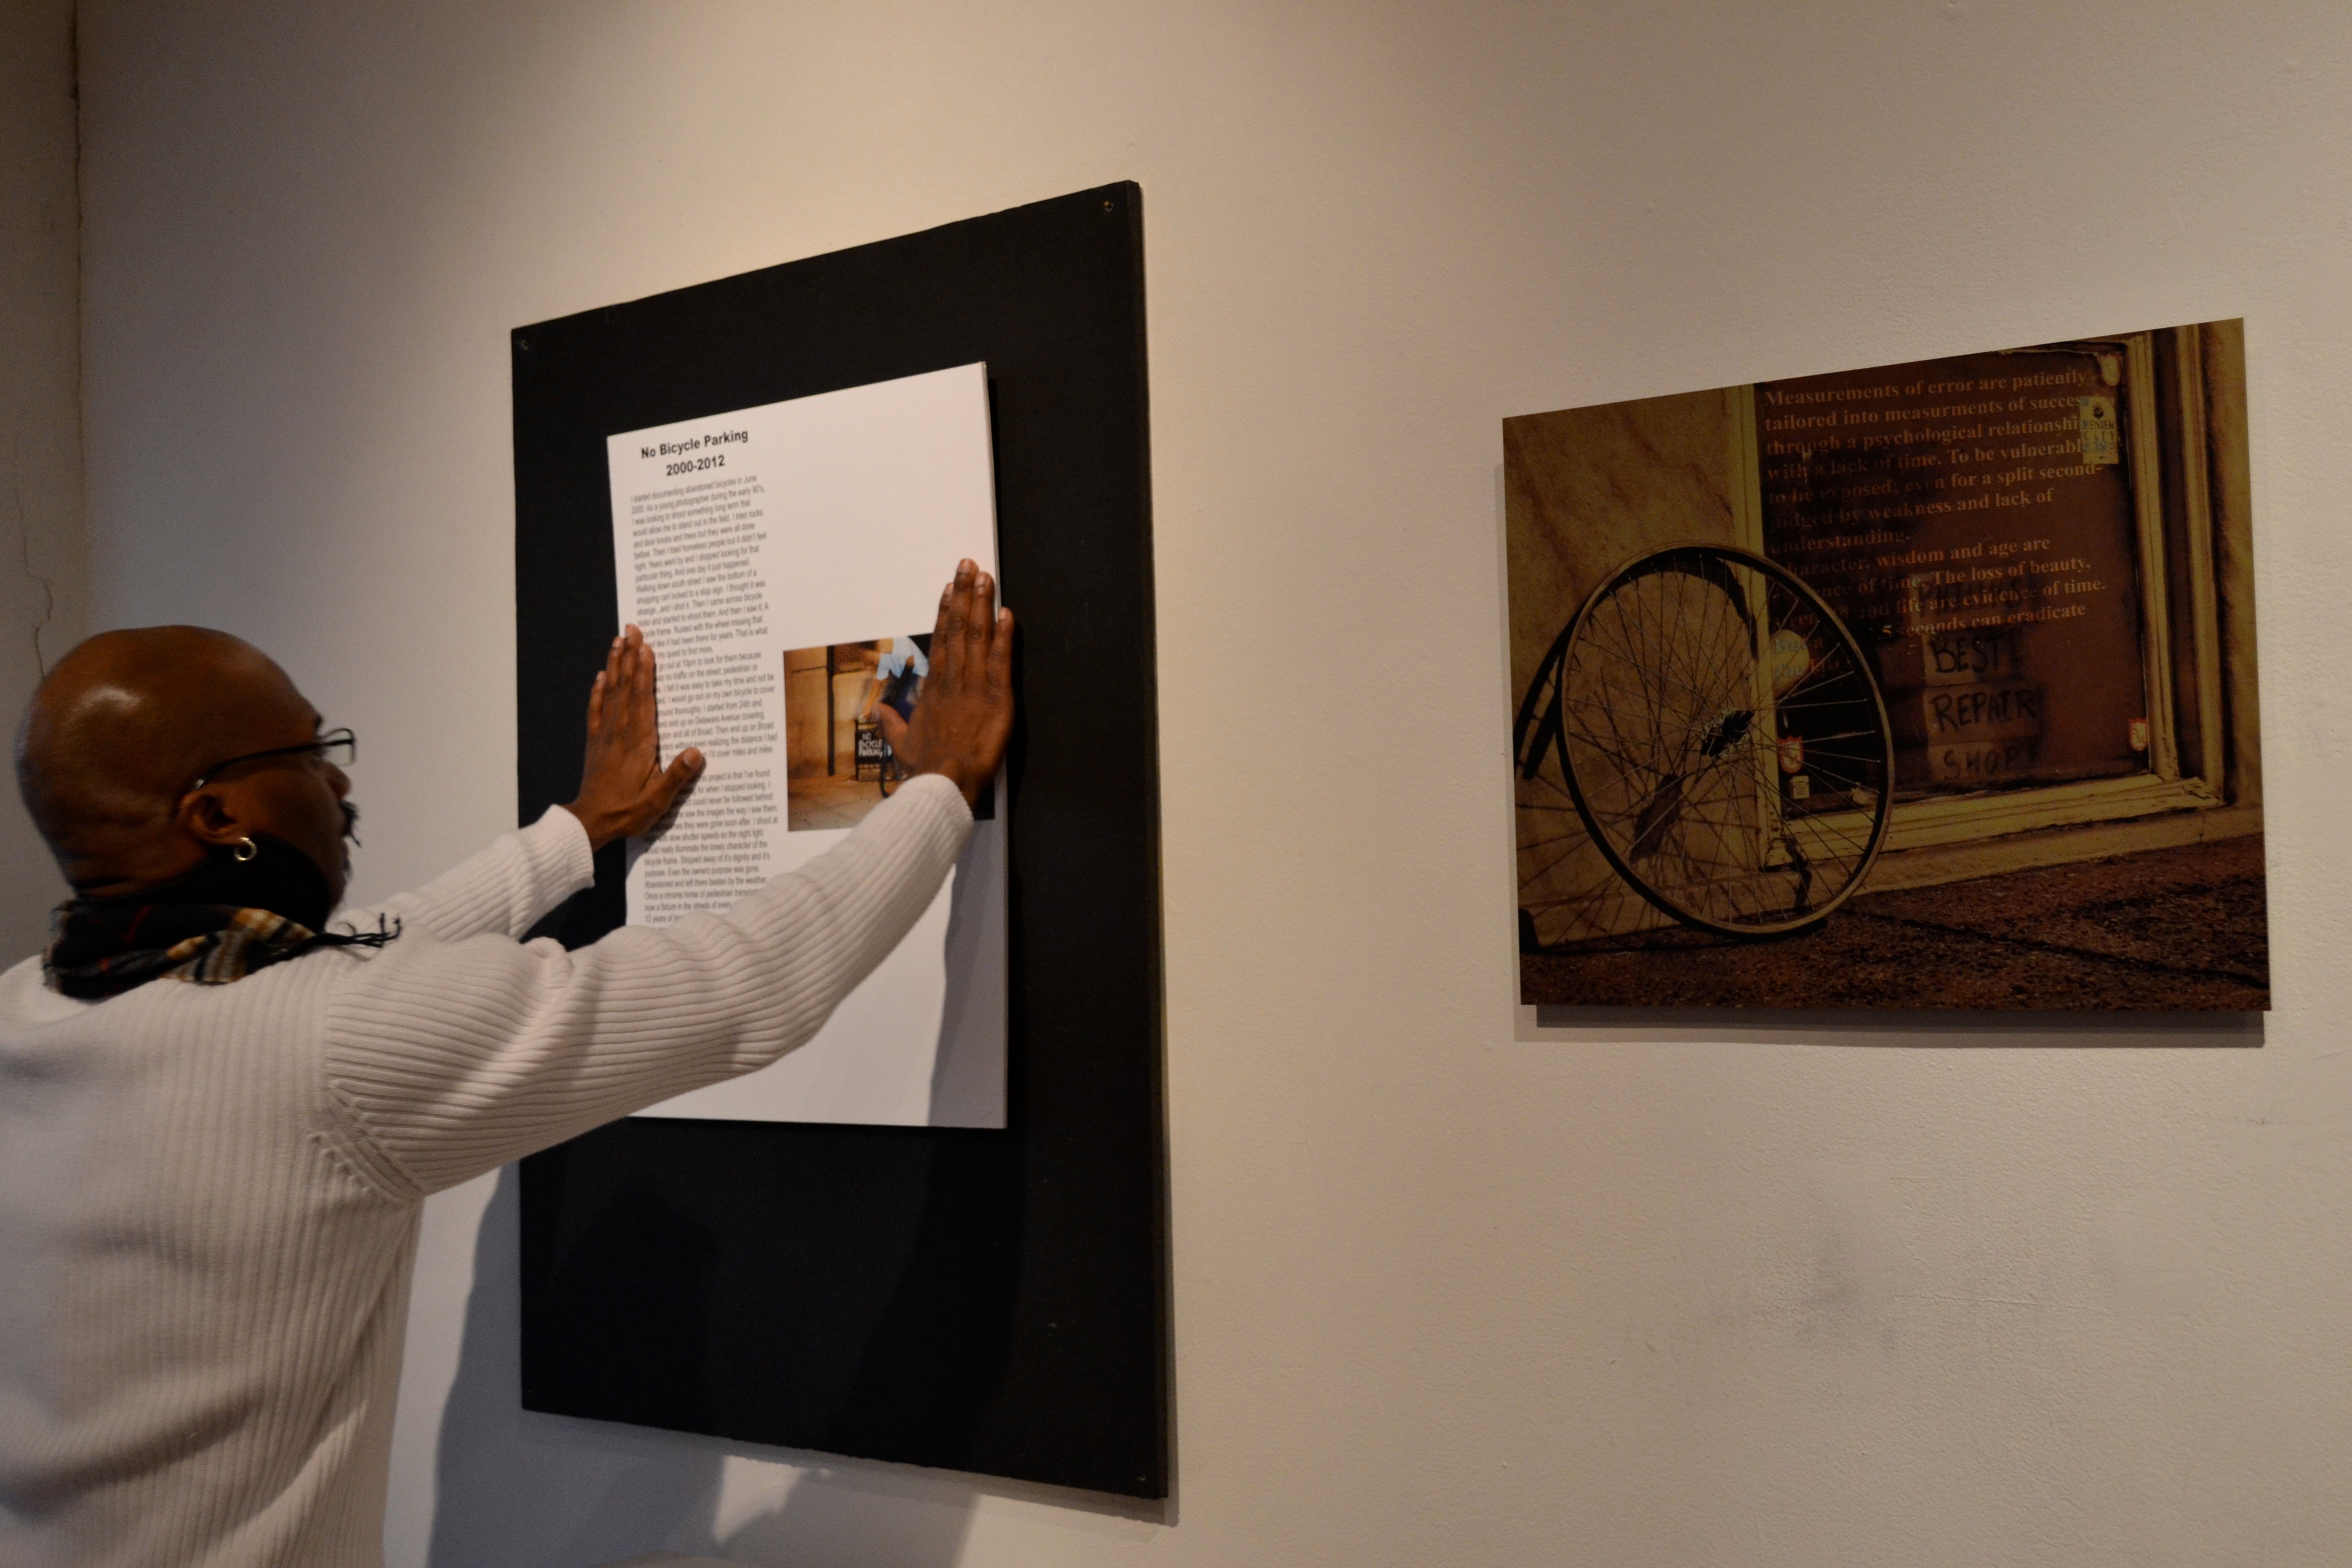 Raphael Xavier preps for the No Bicycle Parking exhibit